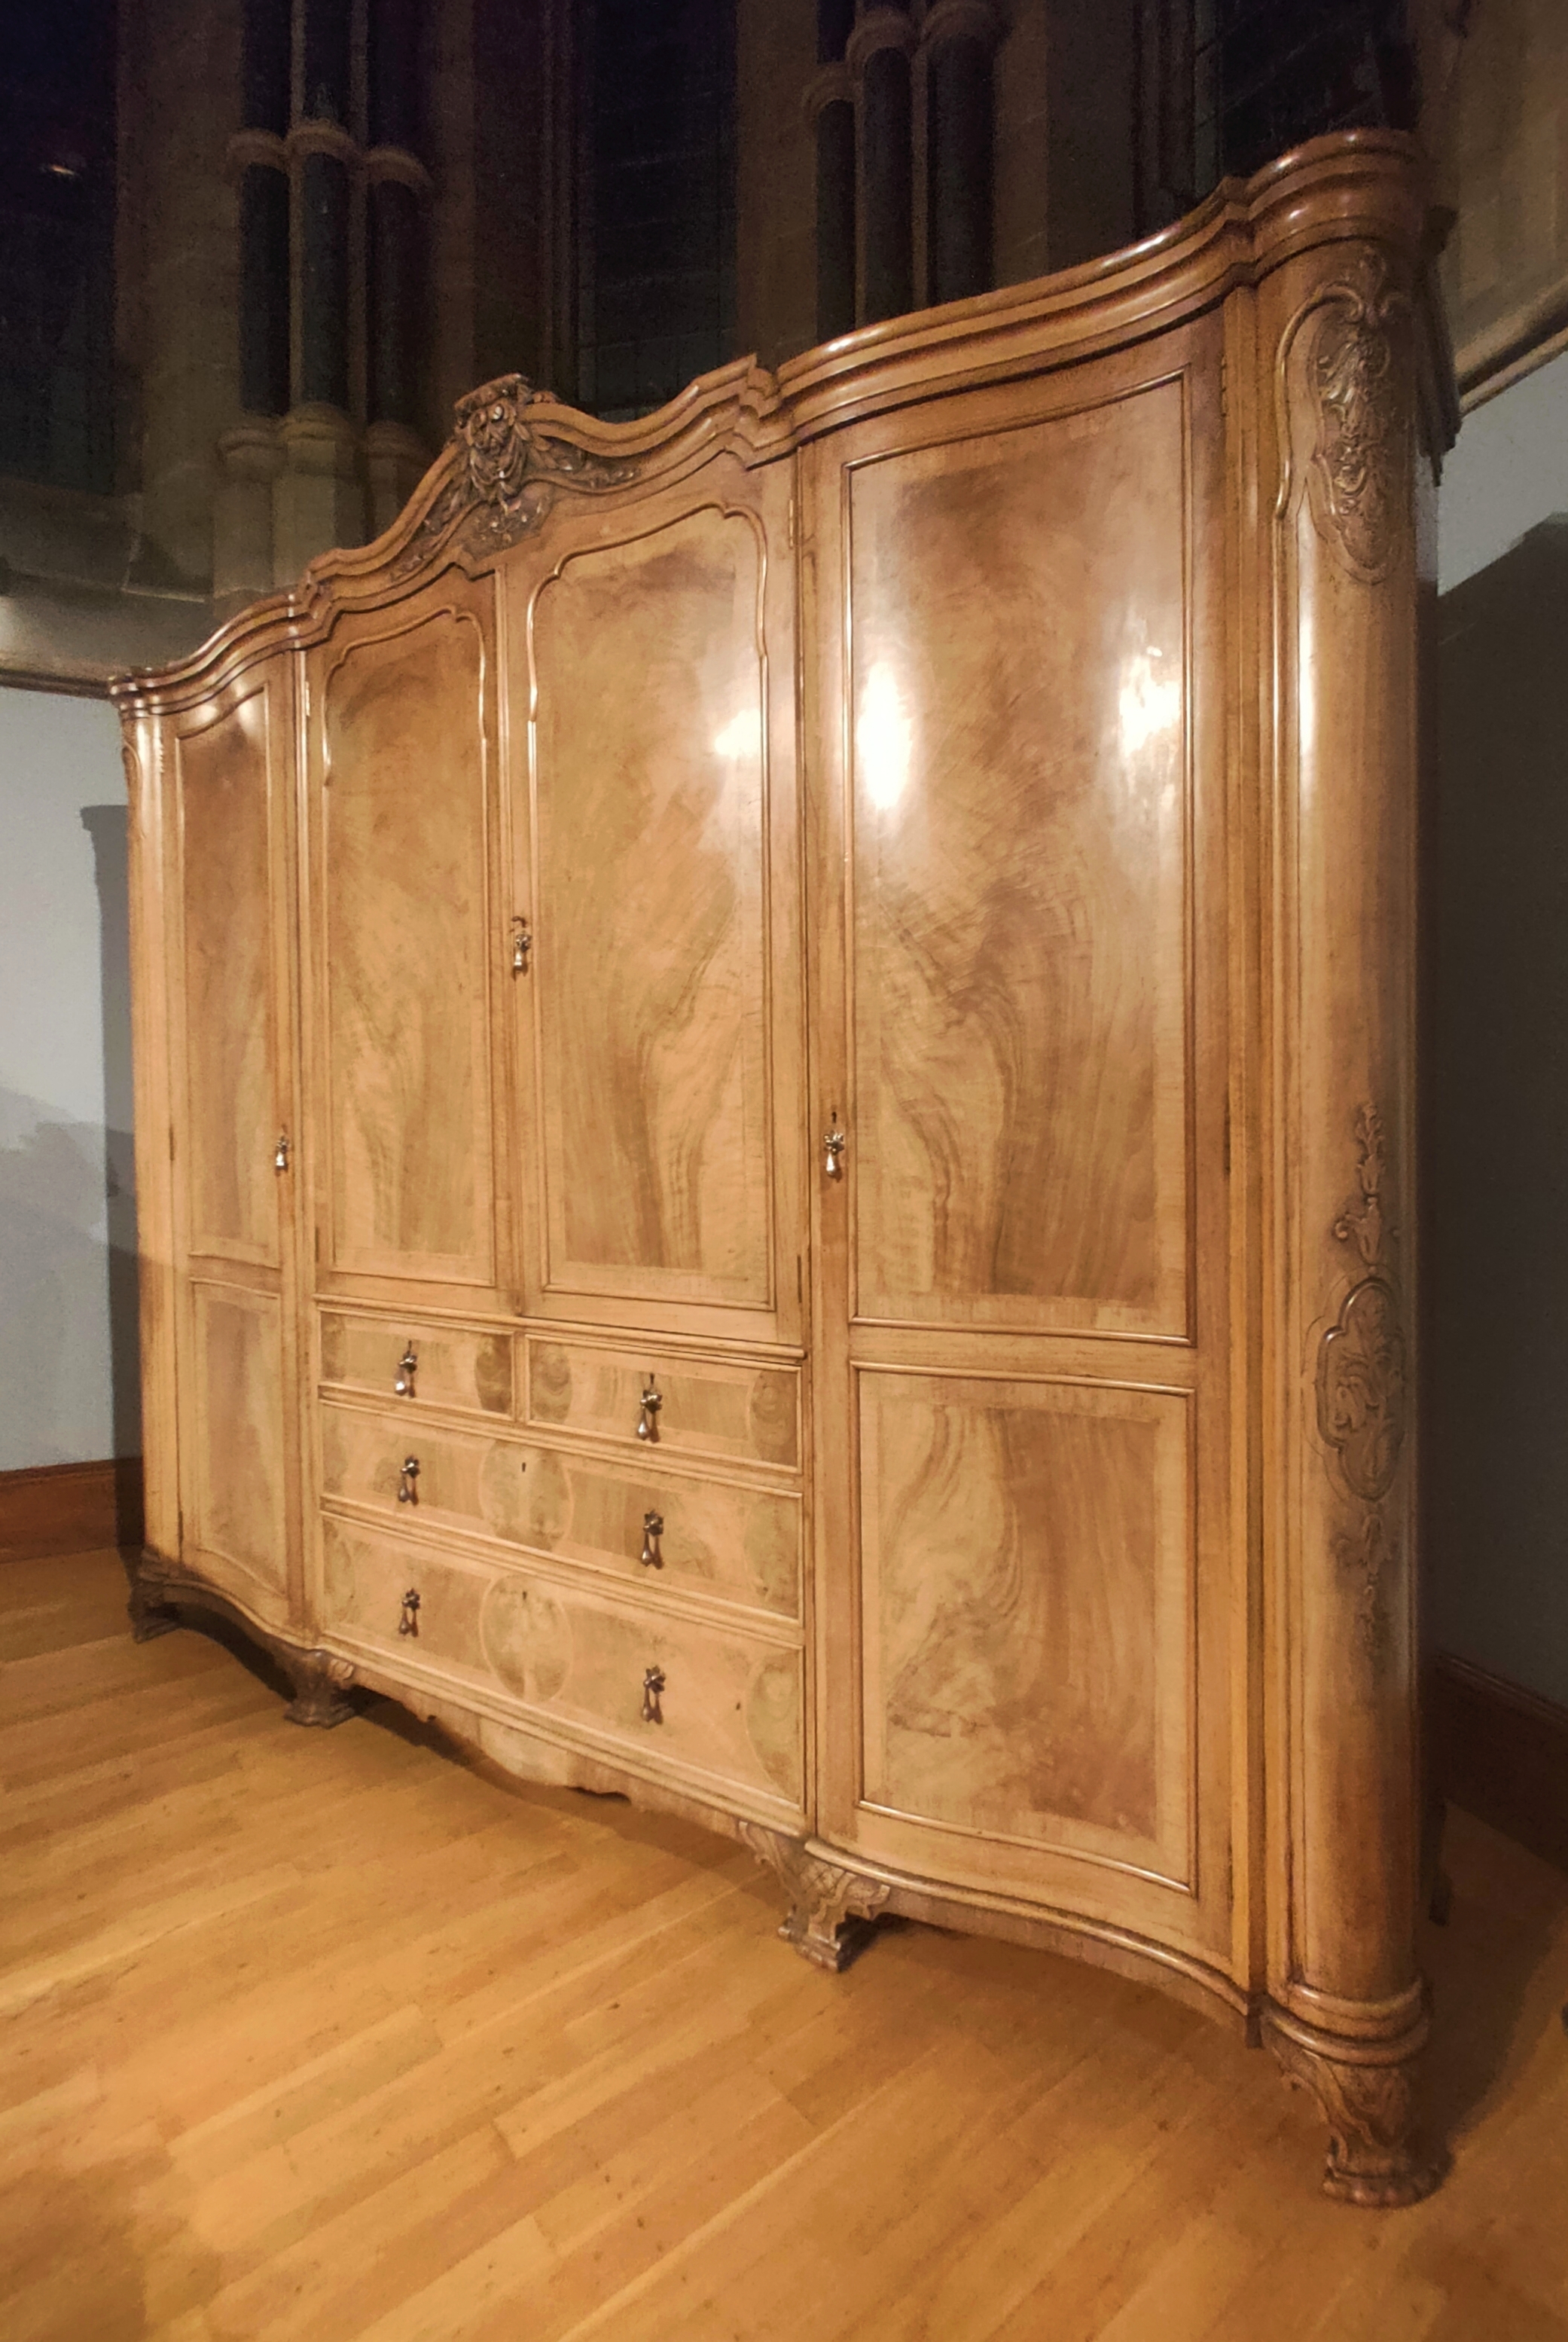 Whytock & Reid Walnut Wardrobe - built for Coco Chanel in Rosehall 1926 - Image 7 of 14